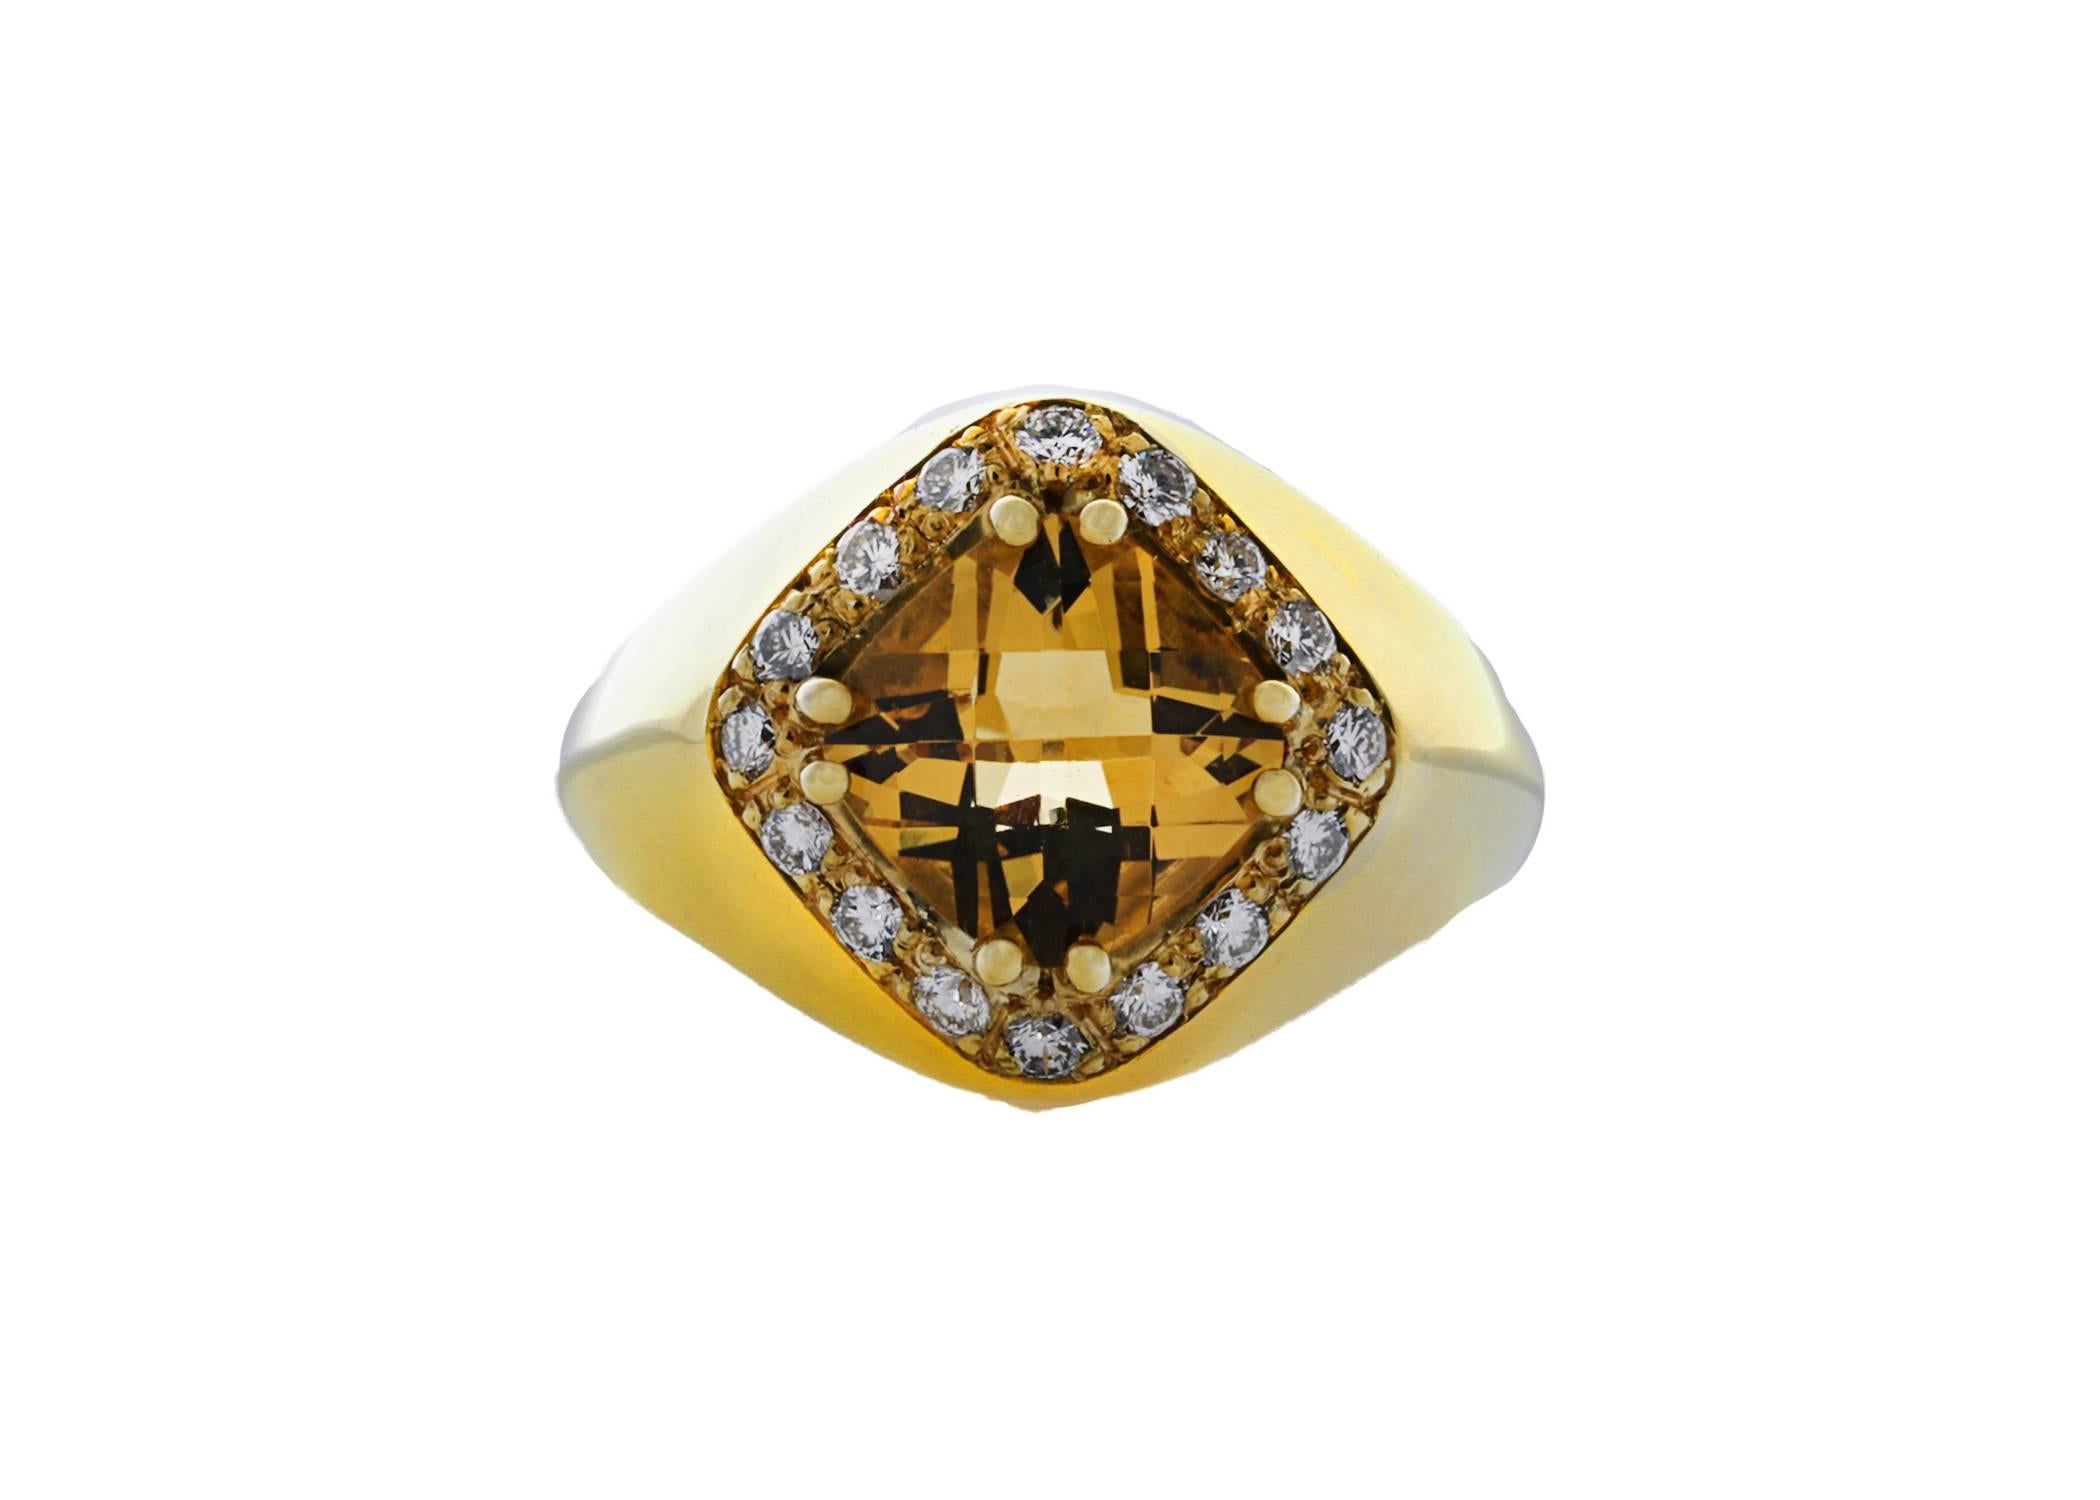 18K cushion/checkerboard cut citrine and diamond ring. The citrine is surrounded by pave set diamonds weighing combined 0.37 carat.
Size 6. Can be sized.